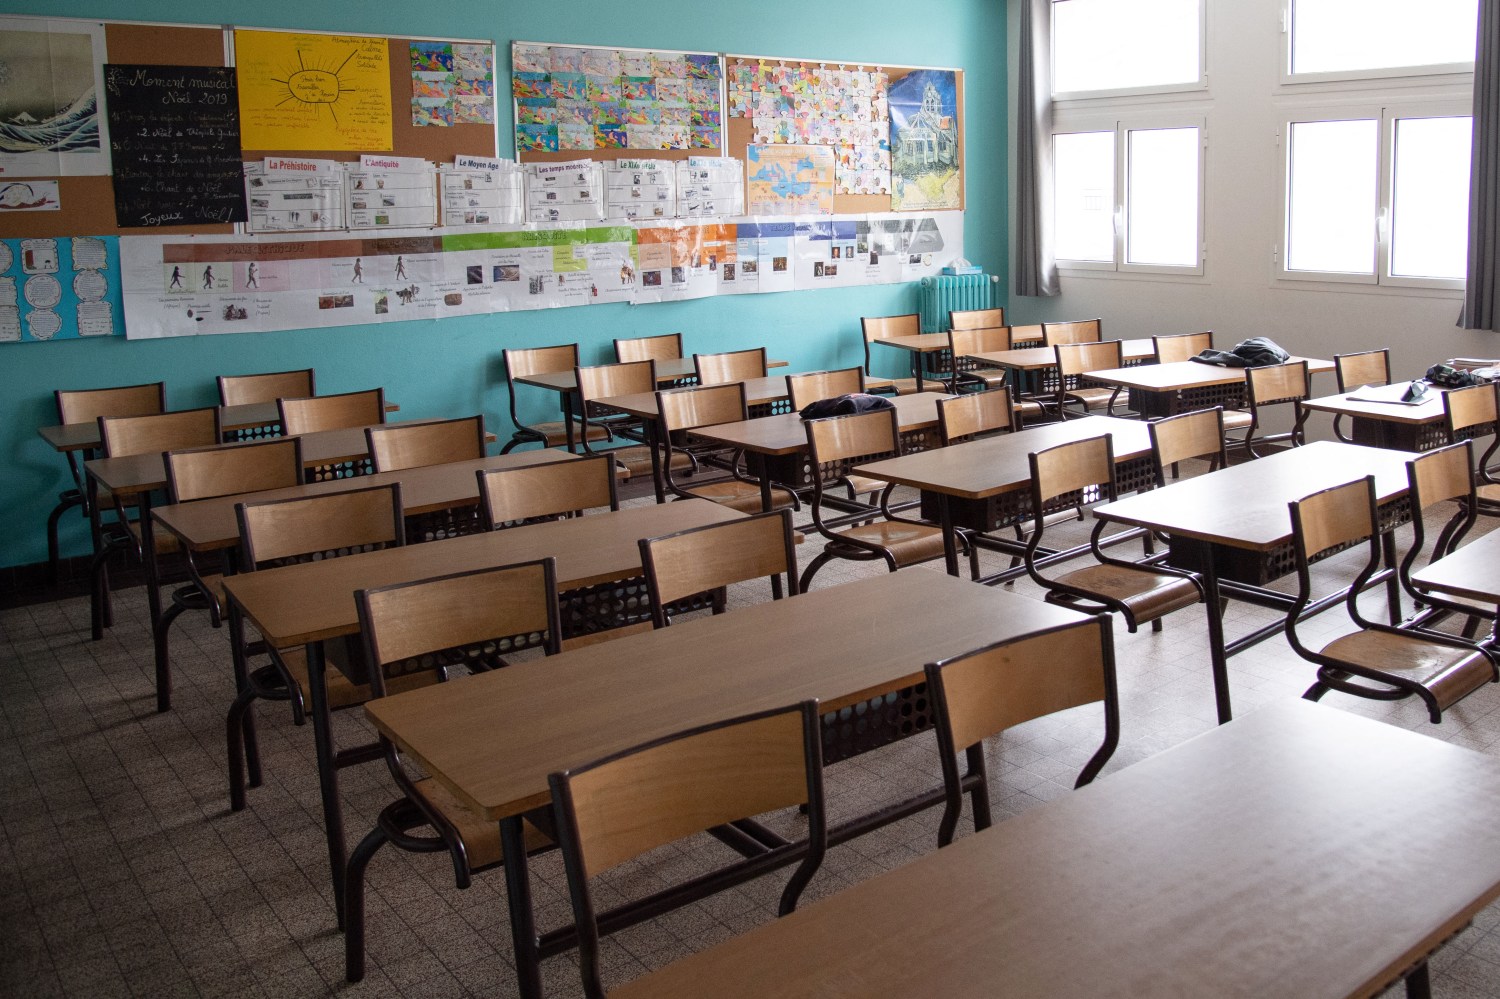 An empty classroom is seen during a class operated during lockdown for the healthcare workers' children at the Dupanloup elementary school in Boulogne near Paris, France, on May 05, 2020. Questions rise about the reopening of schools on the eve France's gradual exit from lockdown on 11 May. Photo by Aurore Marechal/ABACAPRESS.COM